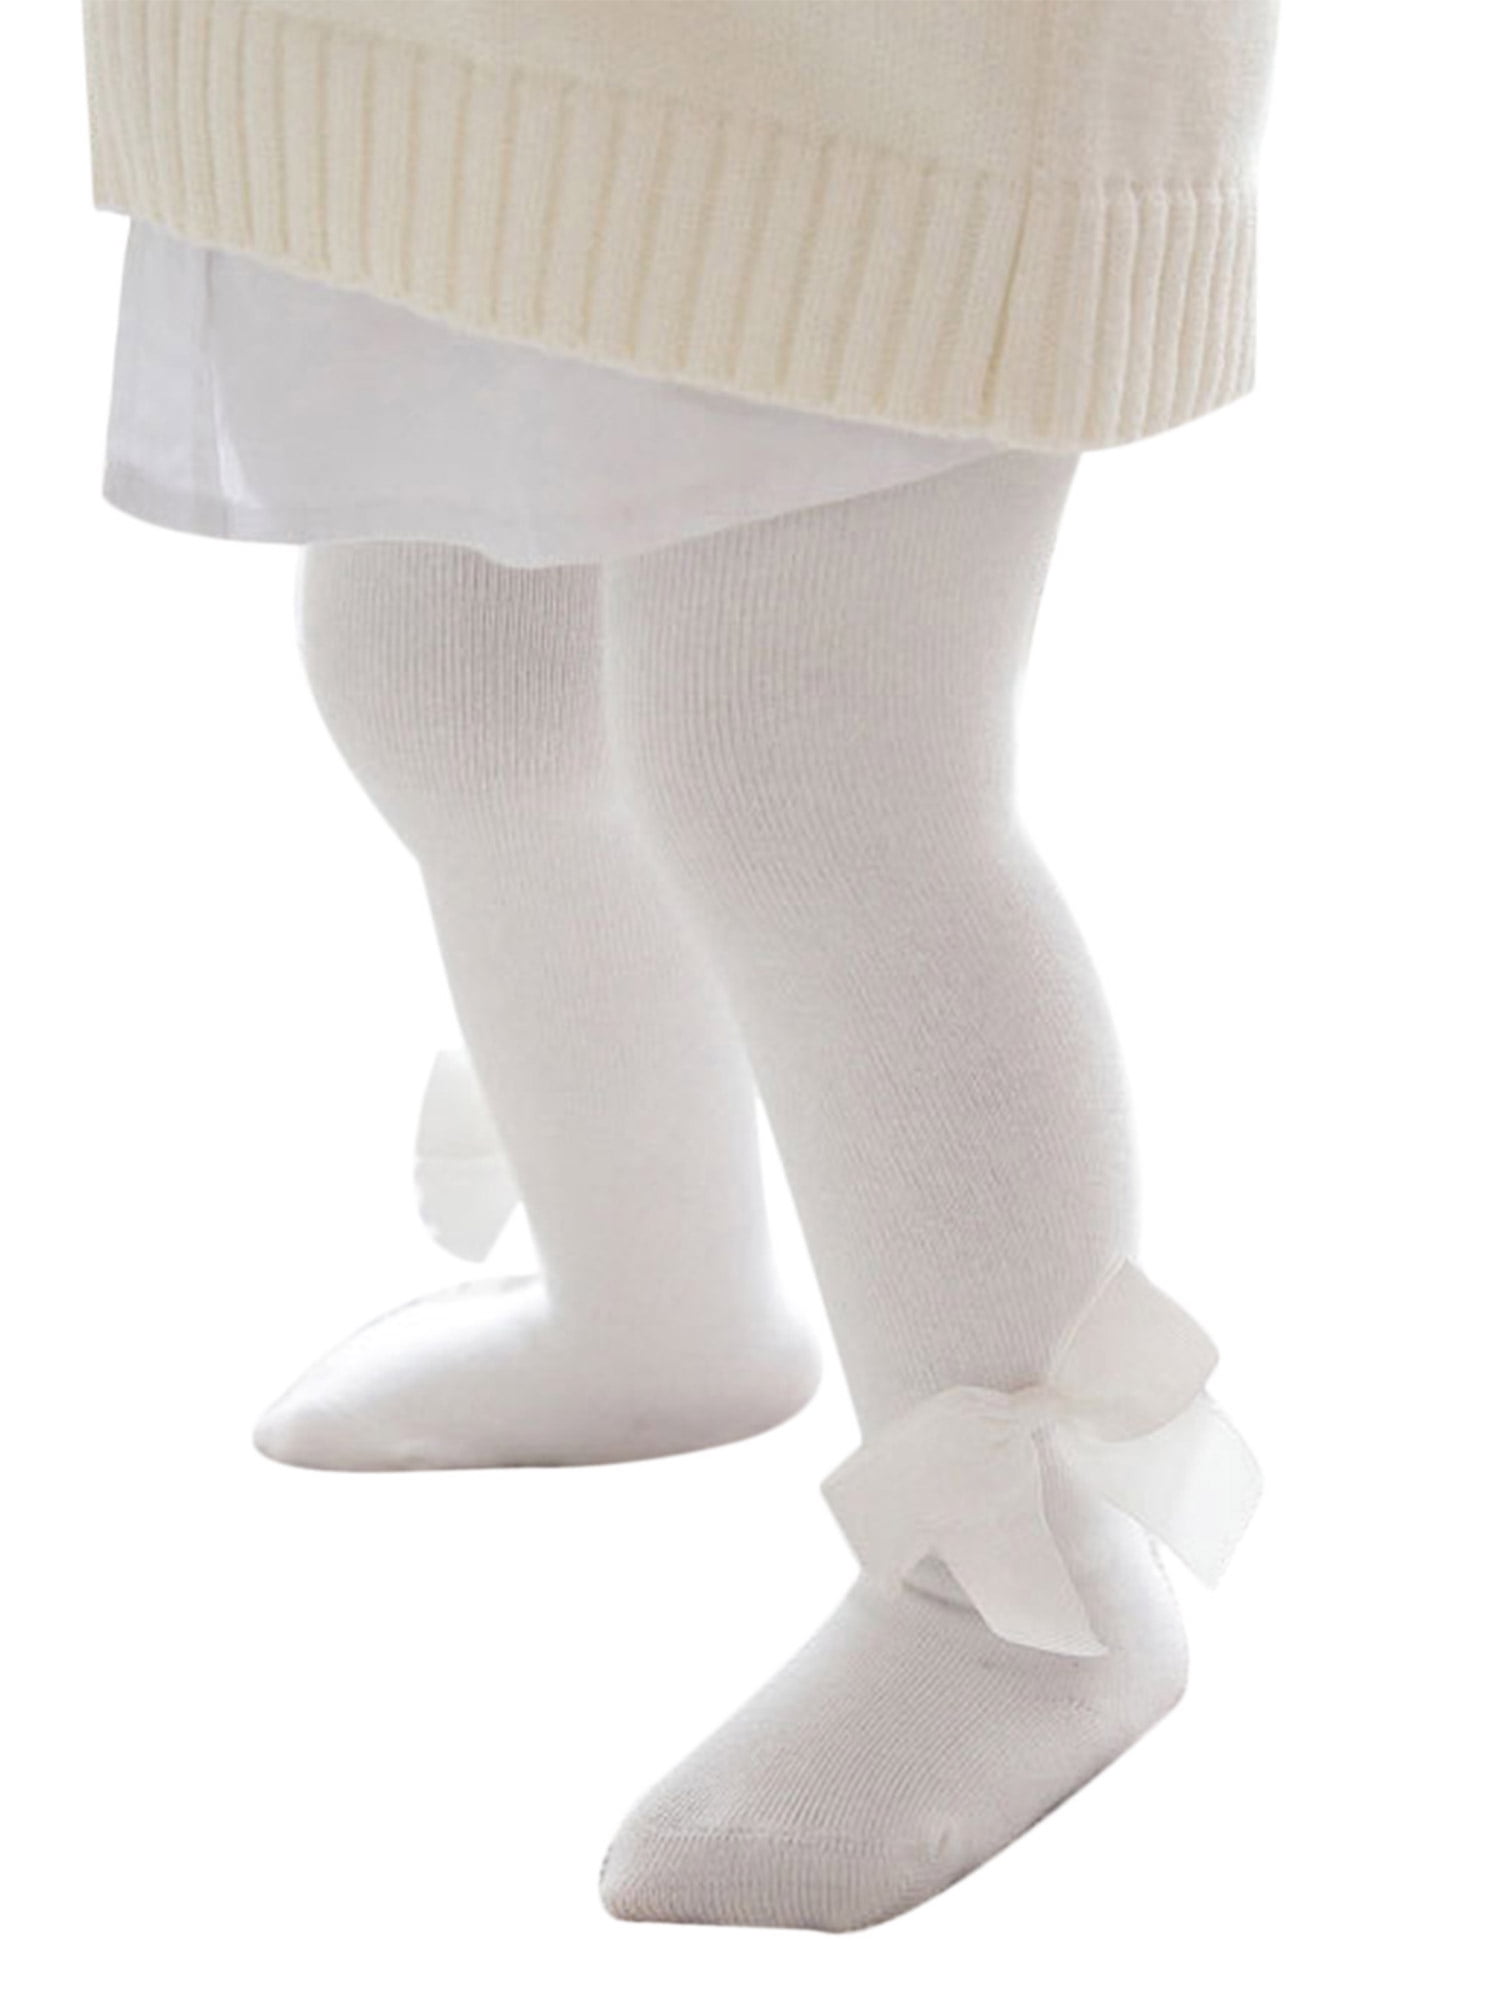 Toddler Kids Baby Girl Cotton Warm Tights Pantyhose Autumn Spring Bownot  Cute Children Girl Stockings 